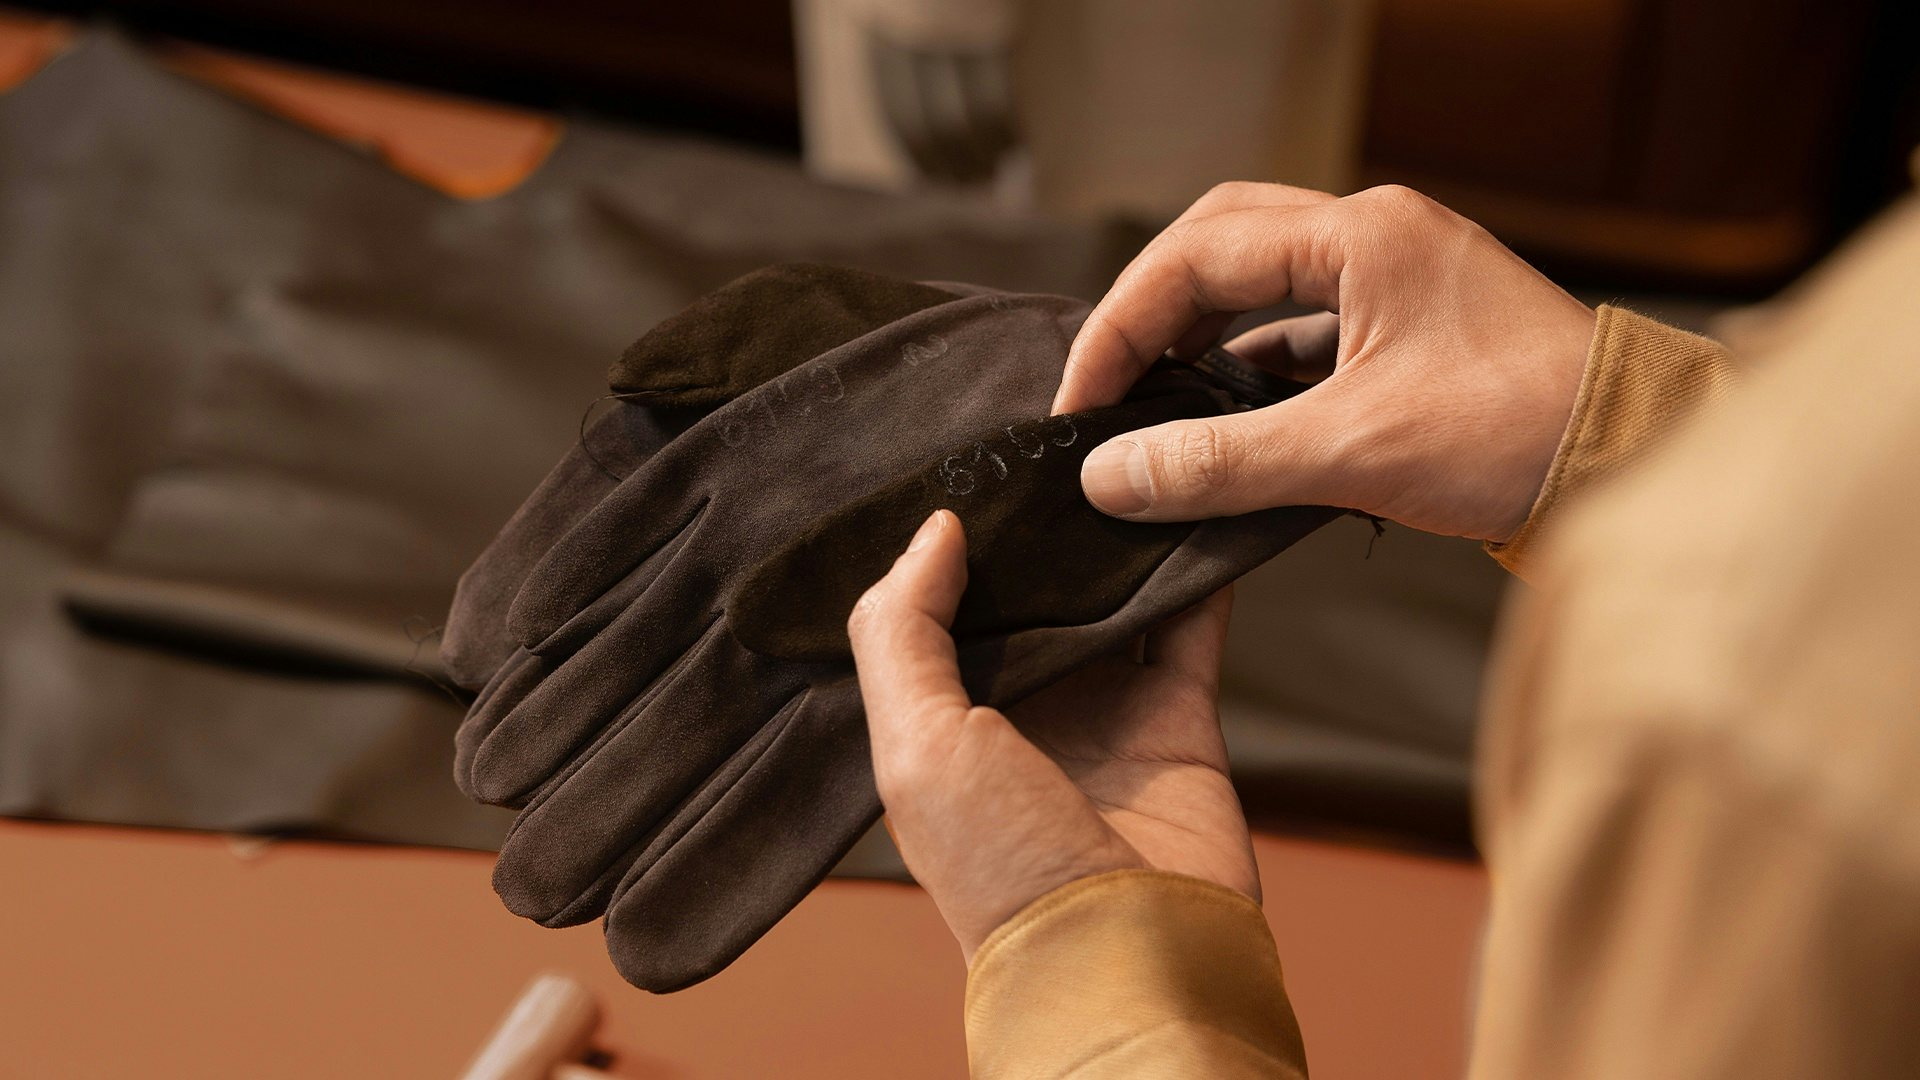 Zegna took inspiration from the techniques and leather traditionally used to craft gloves, resulting in “a shoe that fits like a glove.” Photo: Zegna